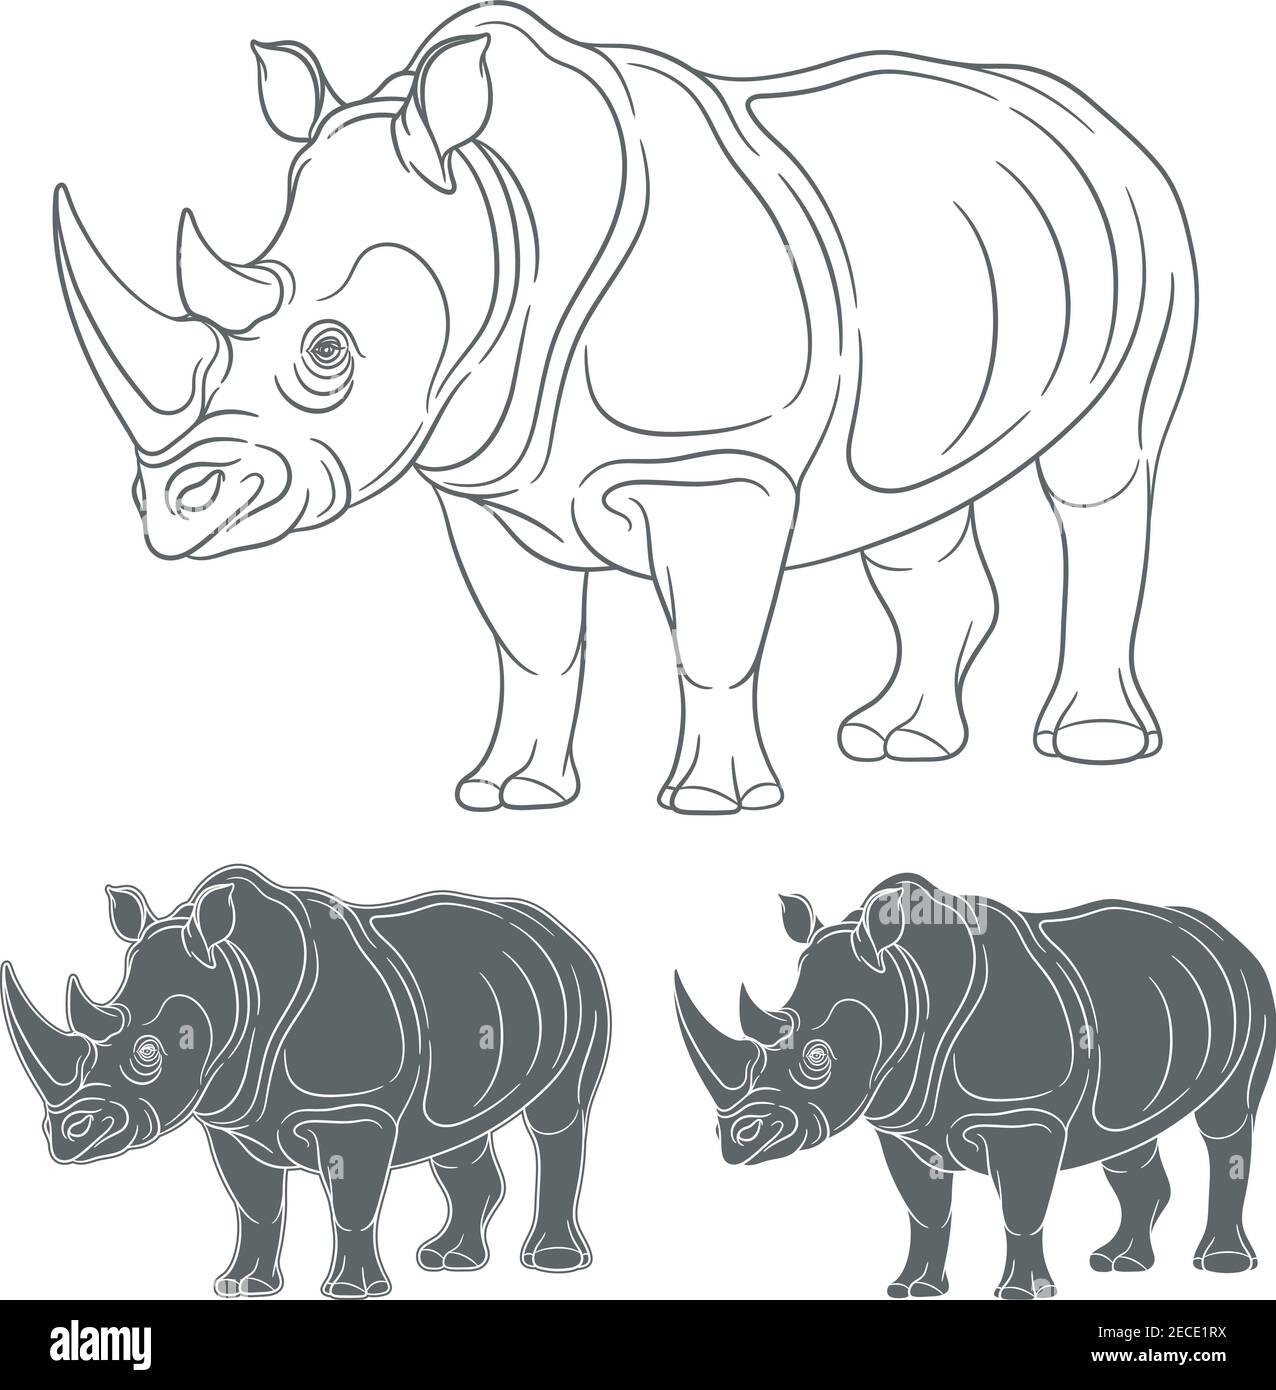 Set of images with a rhinoceros. Isolated objects on a white background. Stock Vector